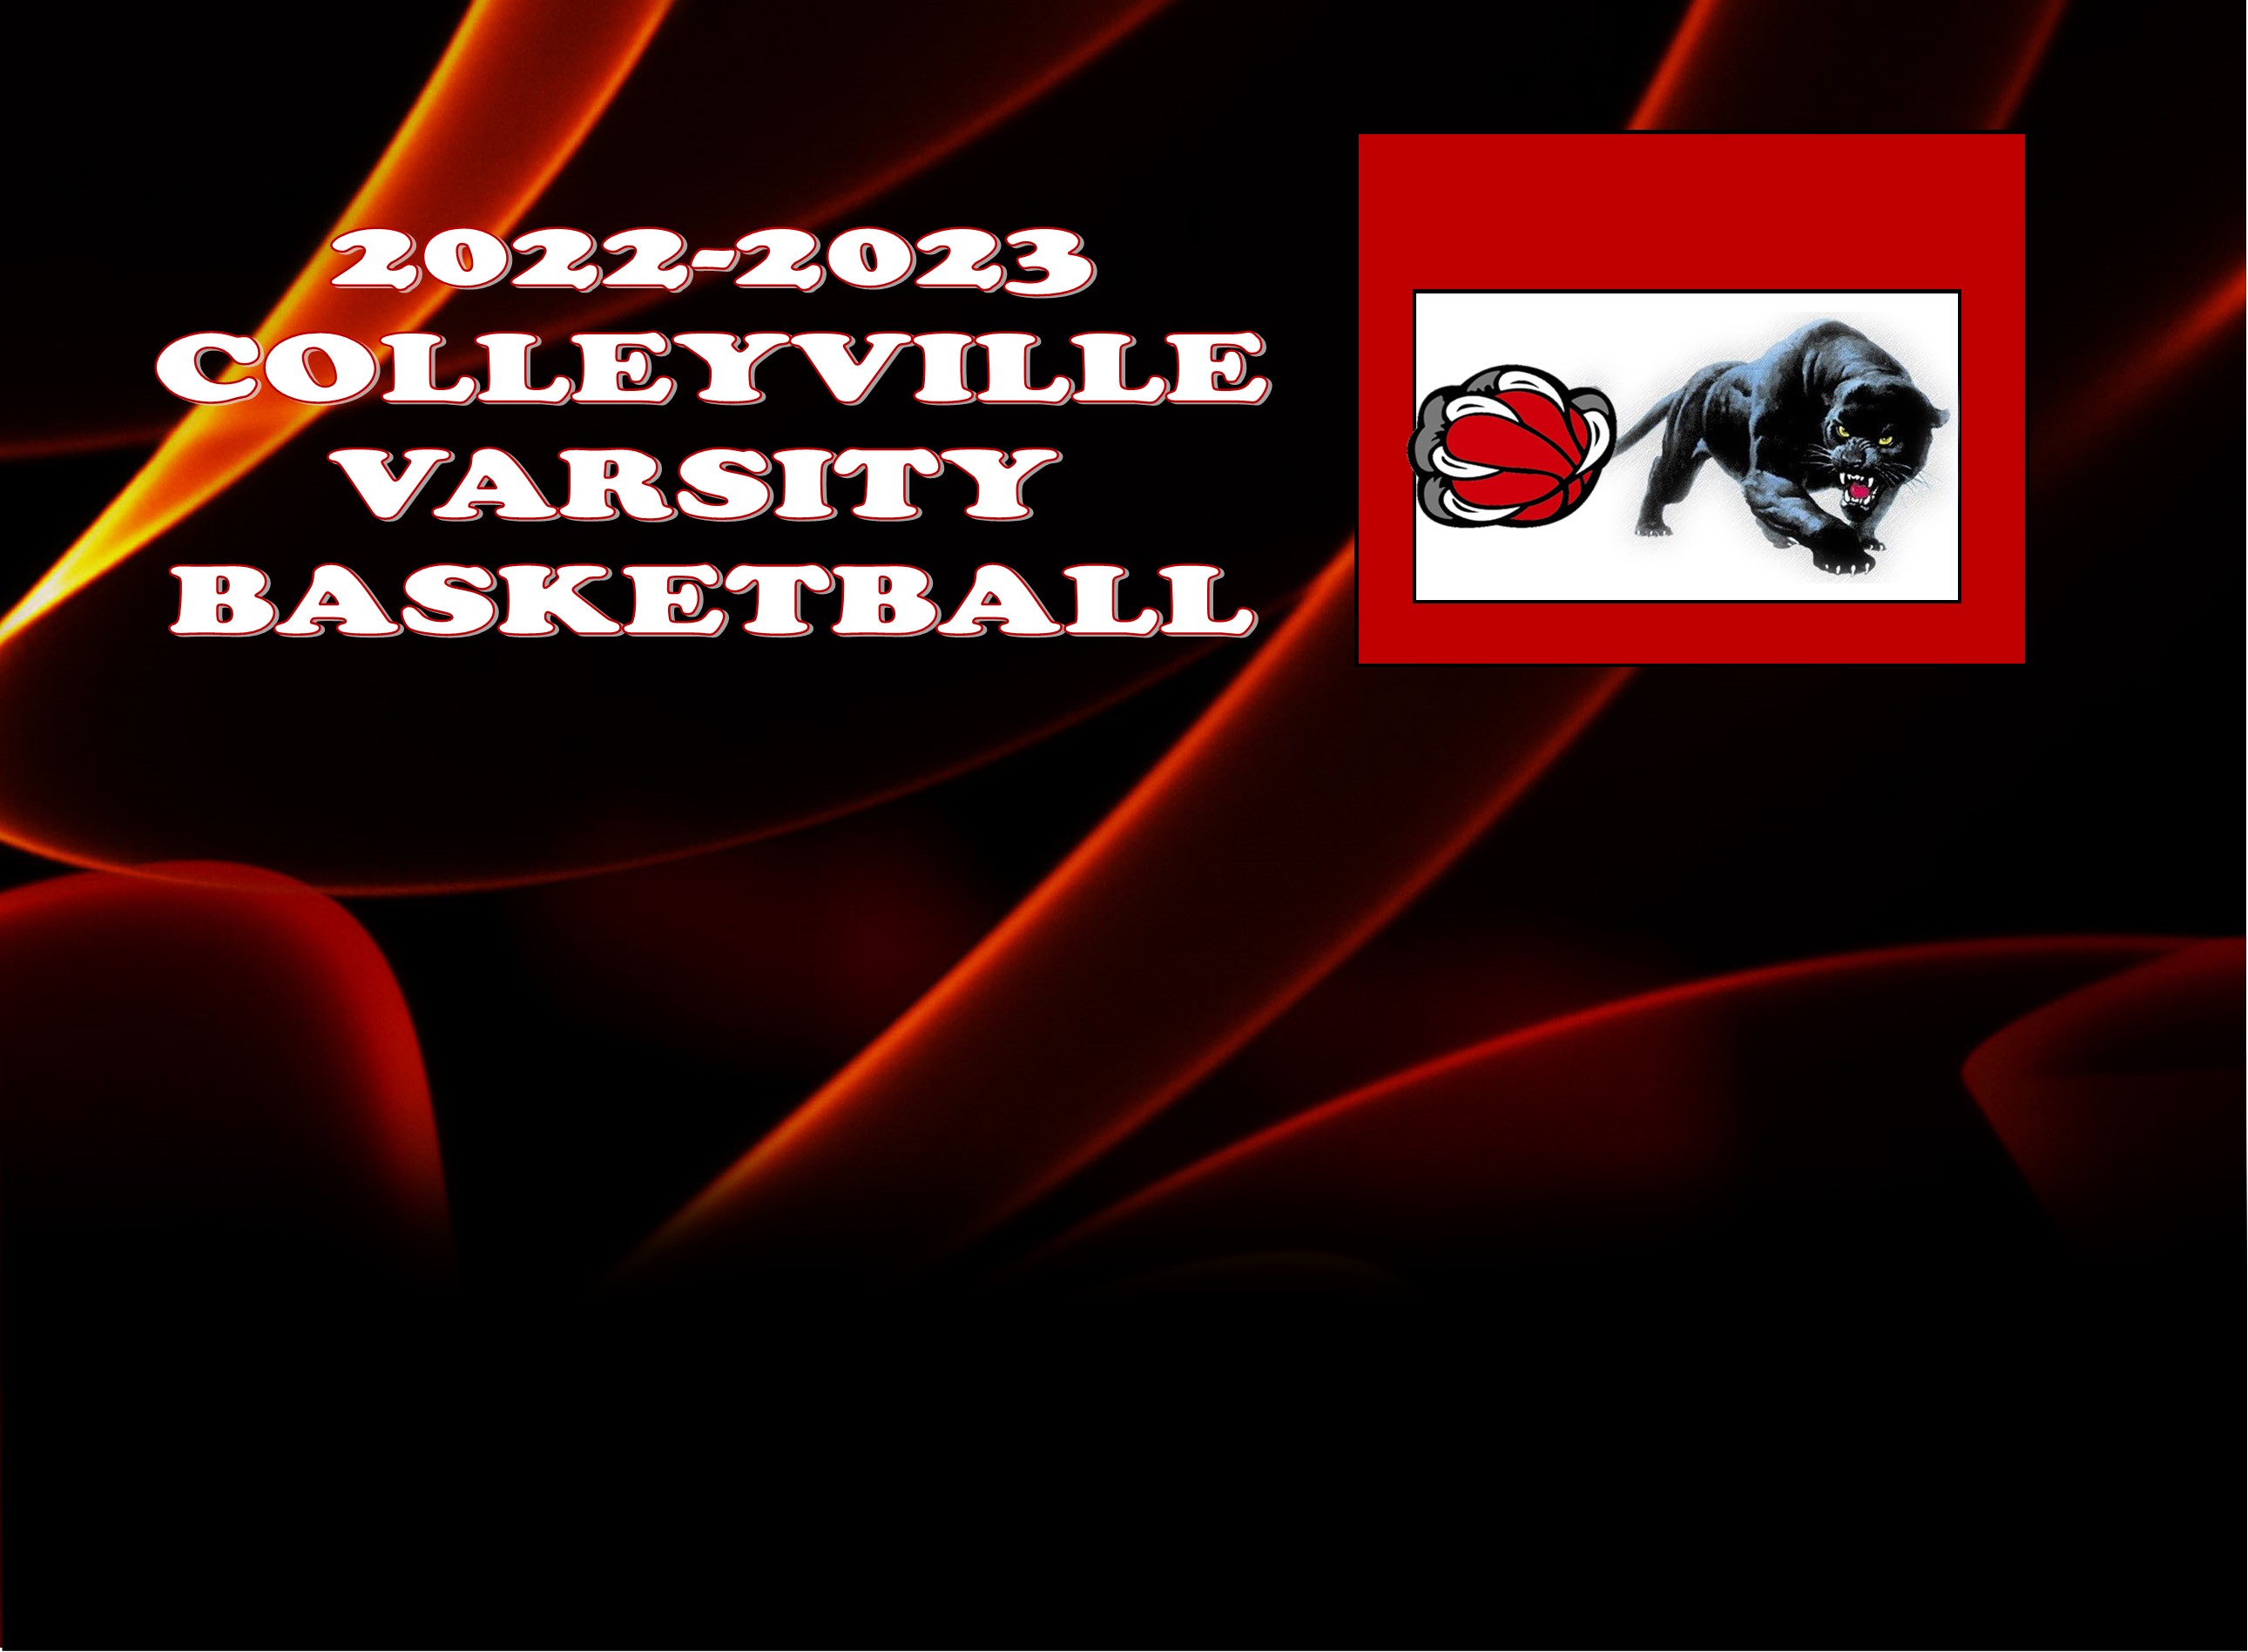 GCISD Varsity Basketball: Colleyville Lady Panthers Upend Pearce Lady Mustangs 62-46